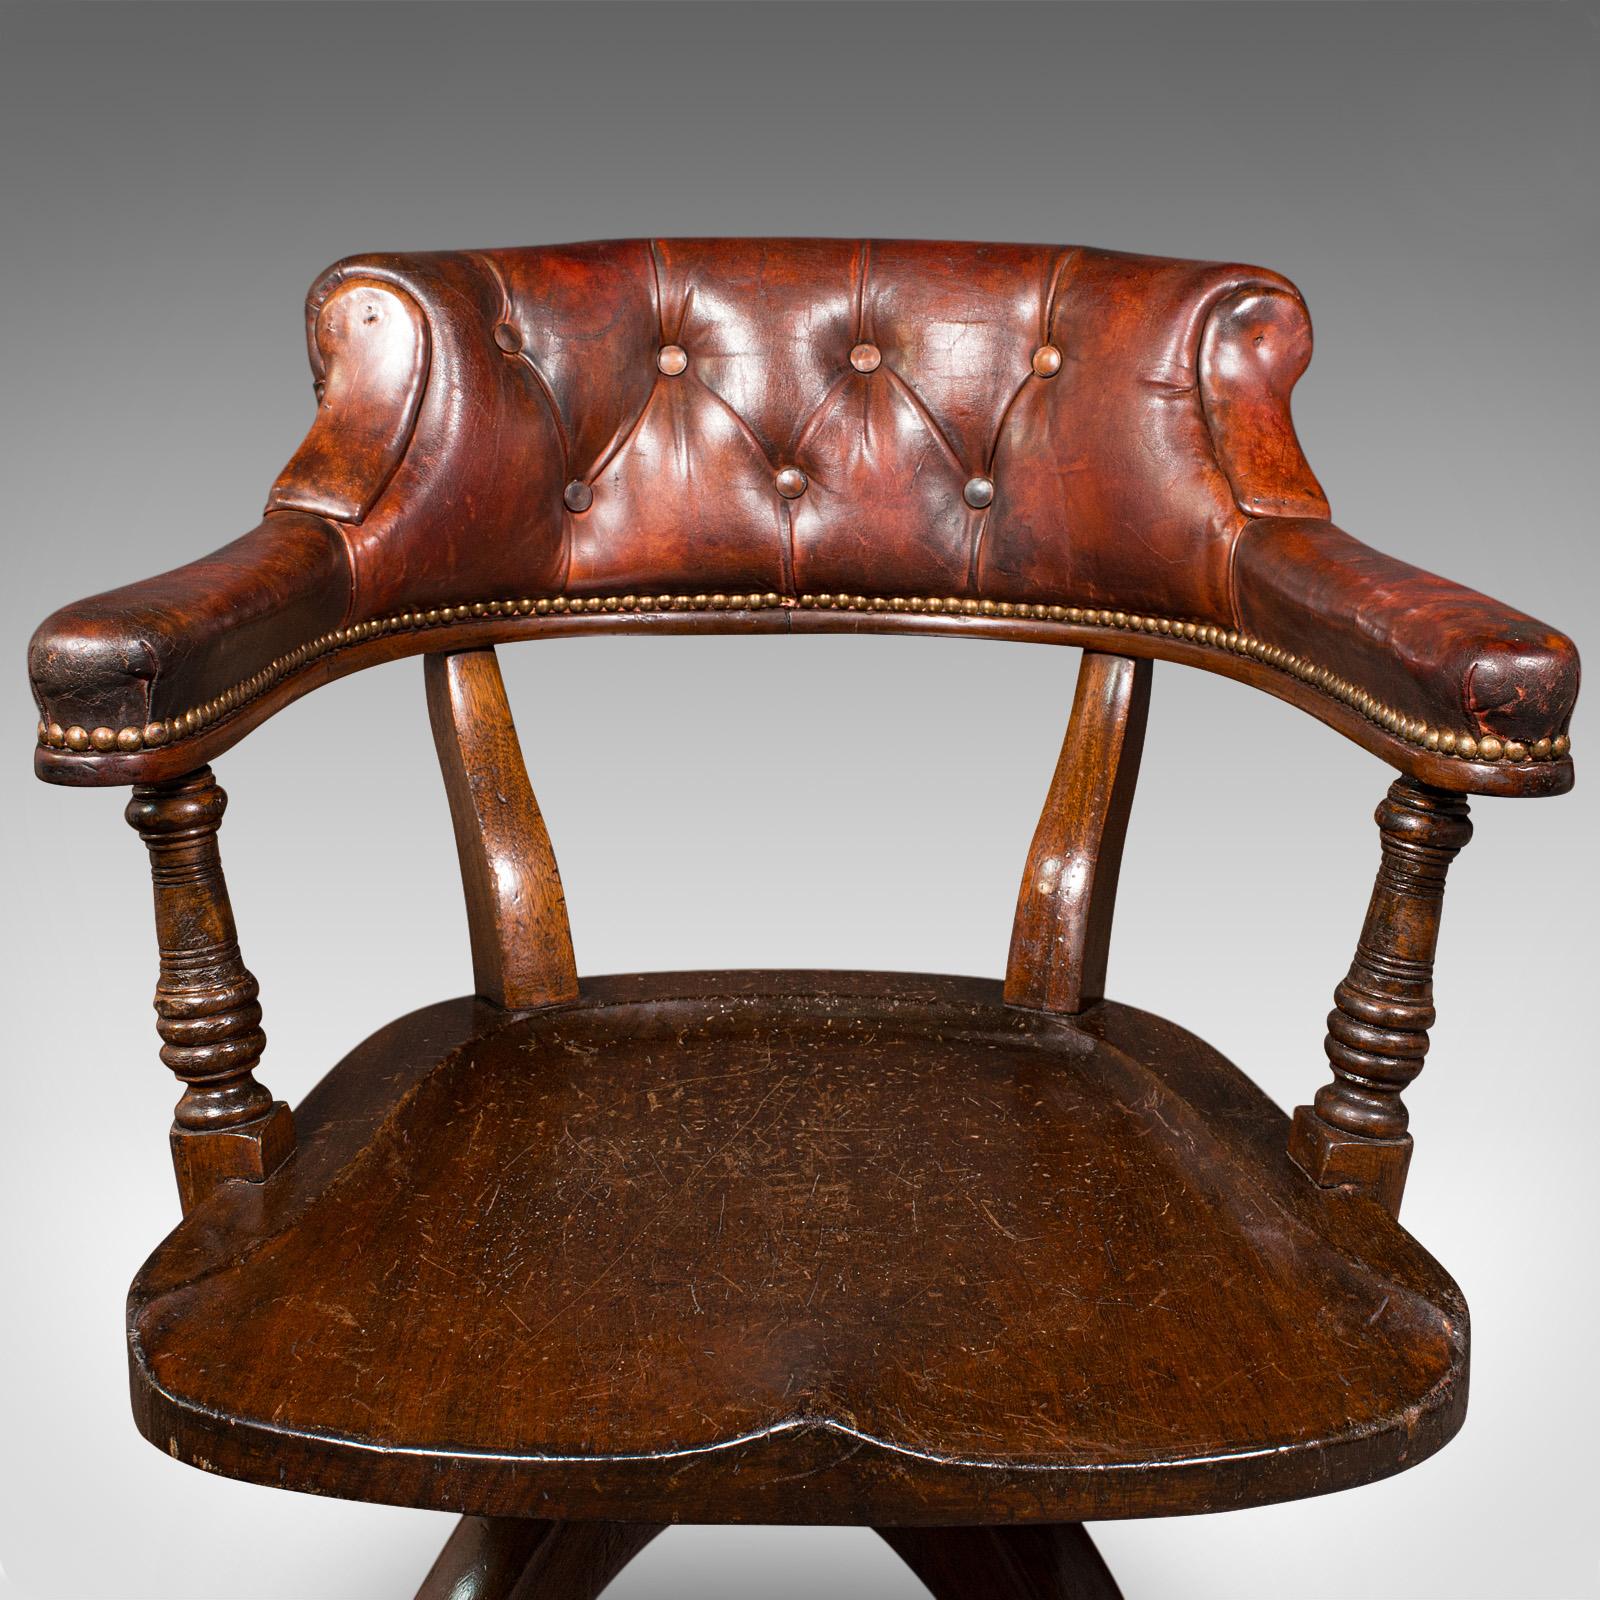 Antique Porter's Hall Chair, English, Leather, Rotary Desk Seat, Victorian, 1880 For Sale 3